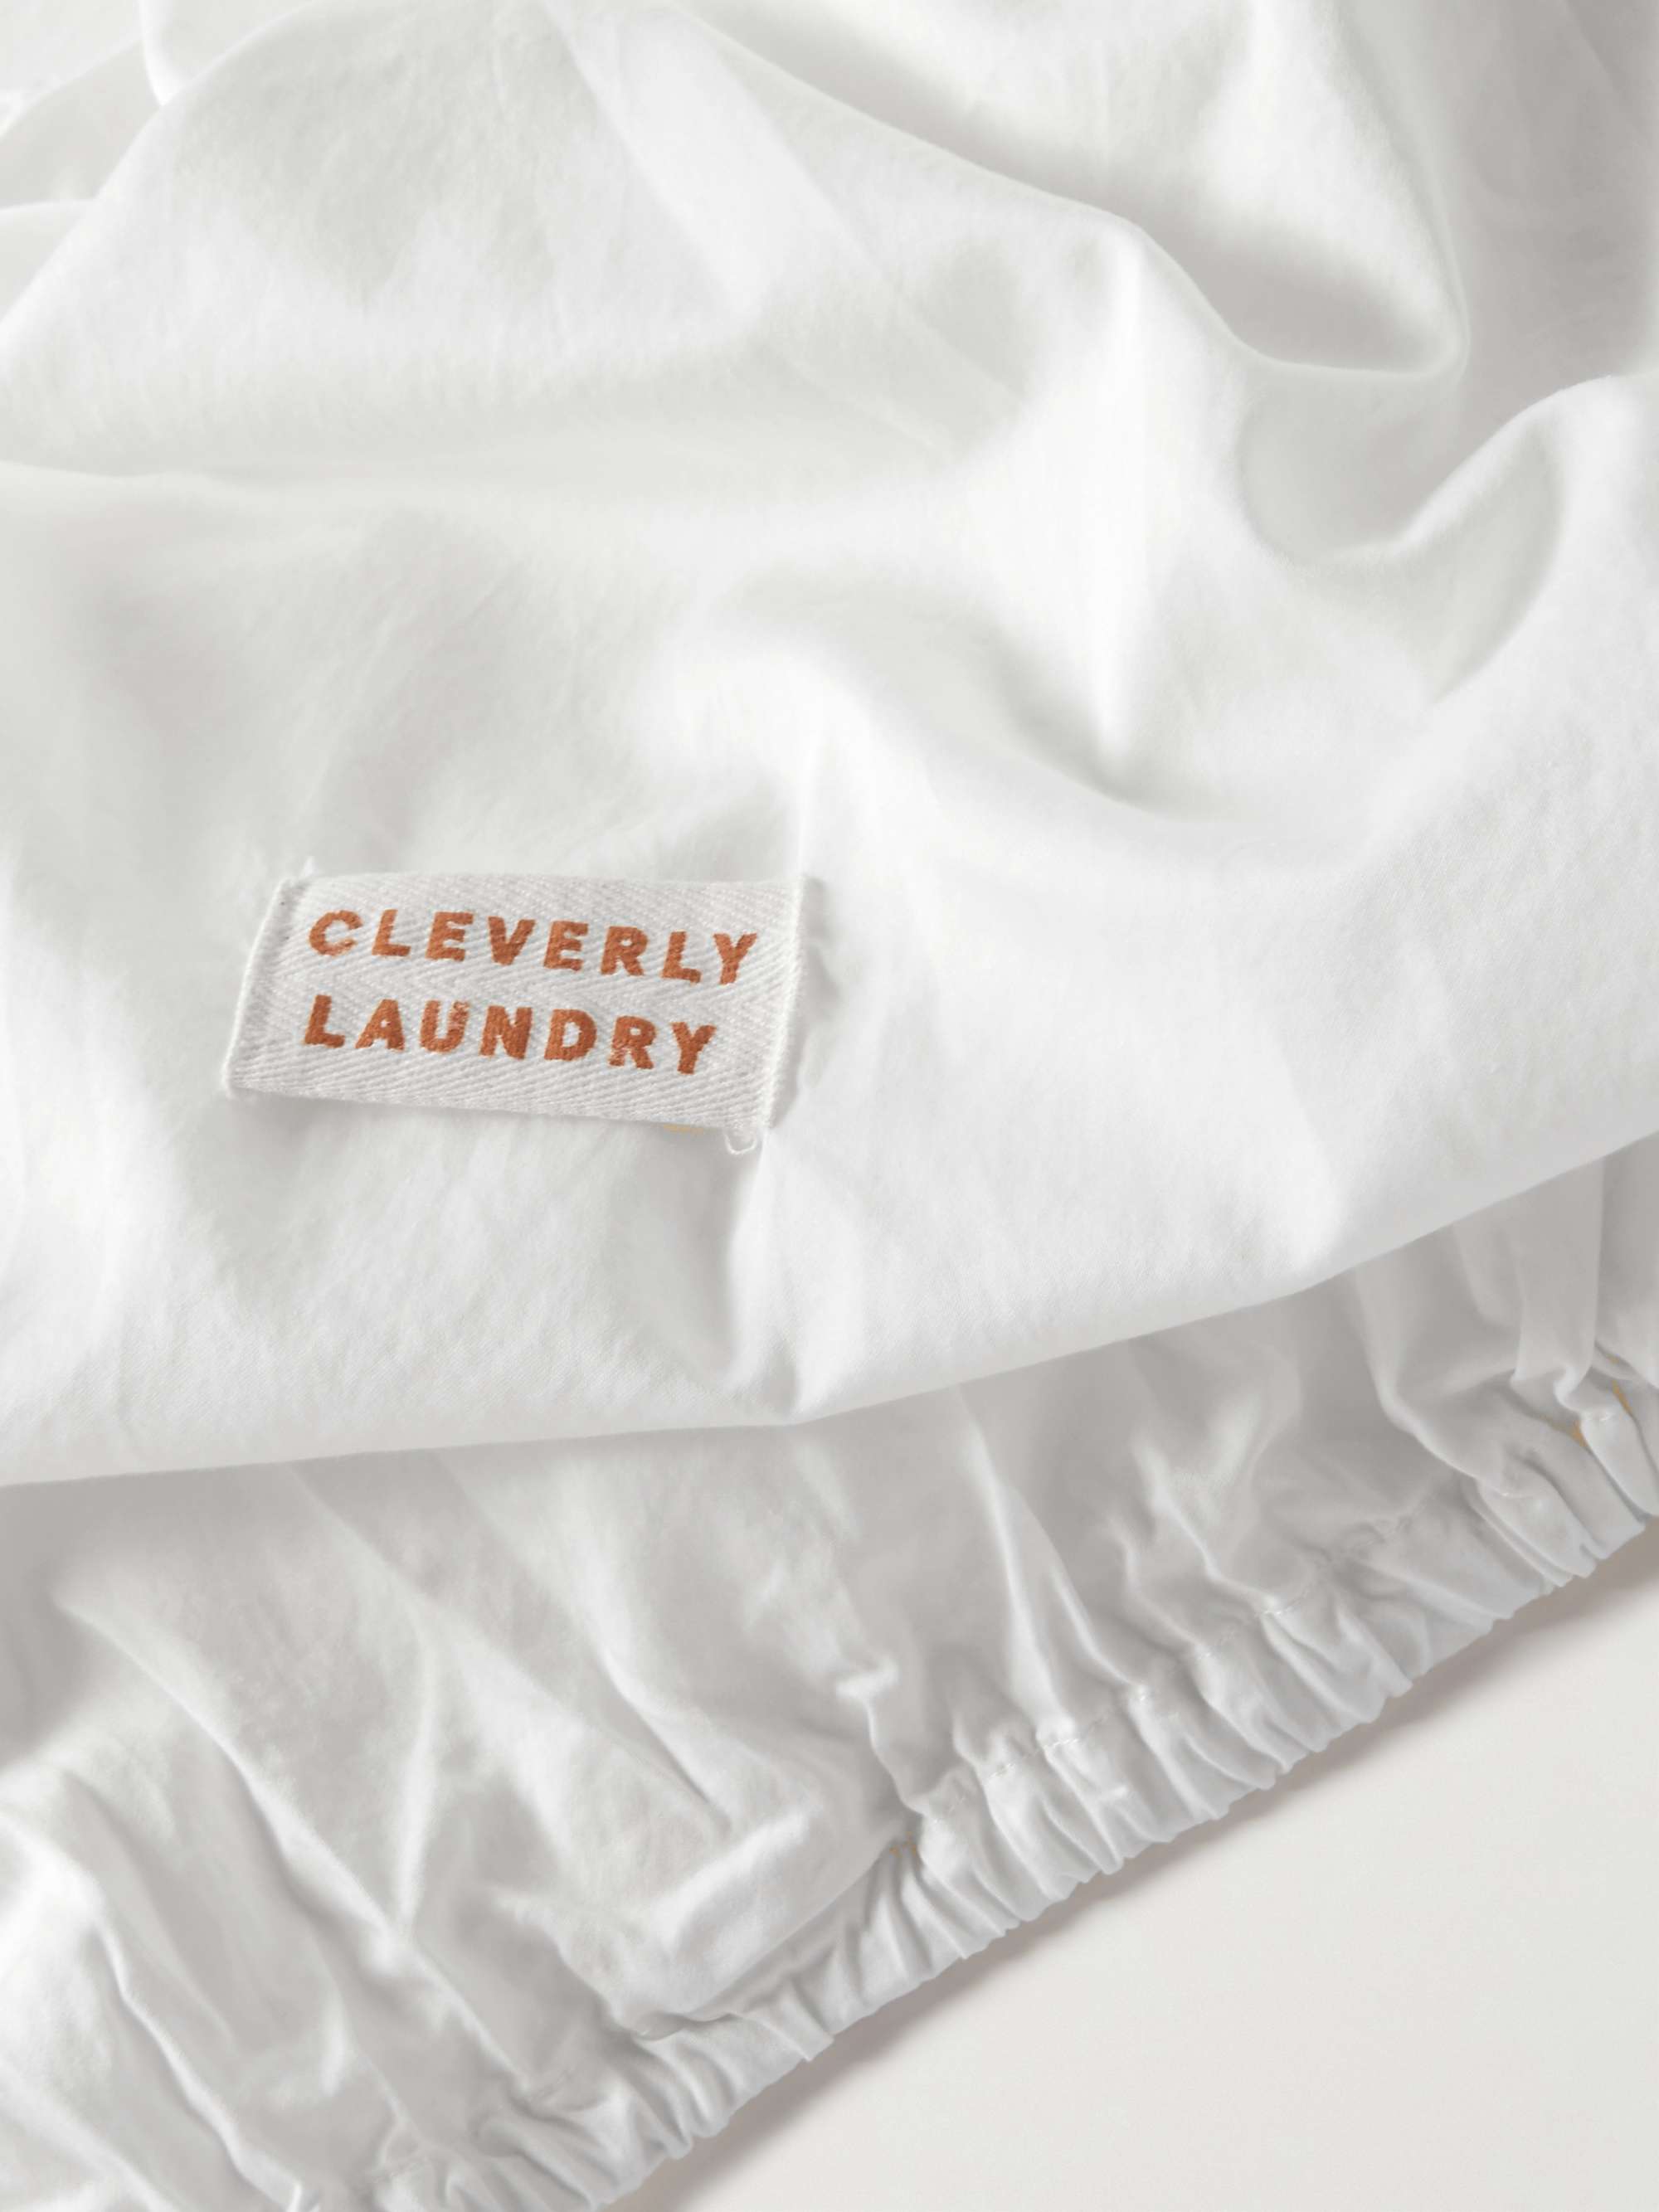 CLEVERLY LAUNDRY Seven-Piece Cotton Bed Sheet Set - King